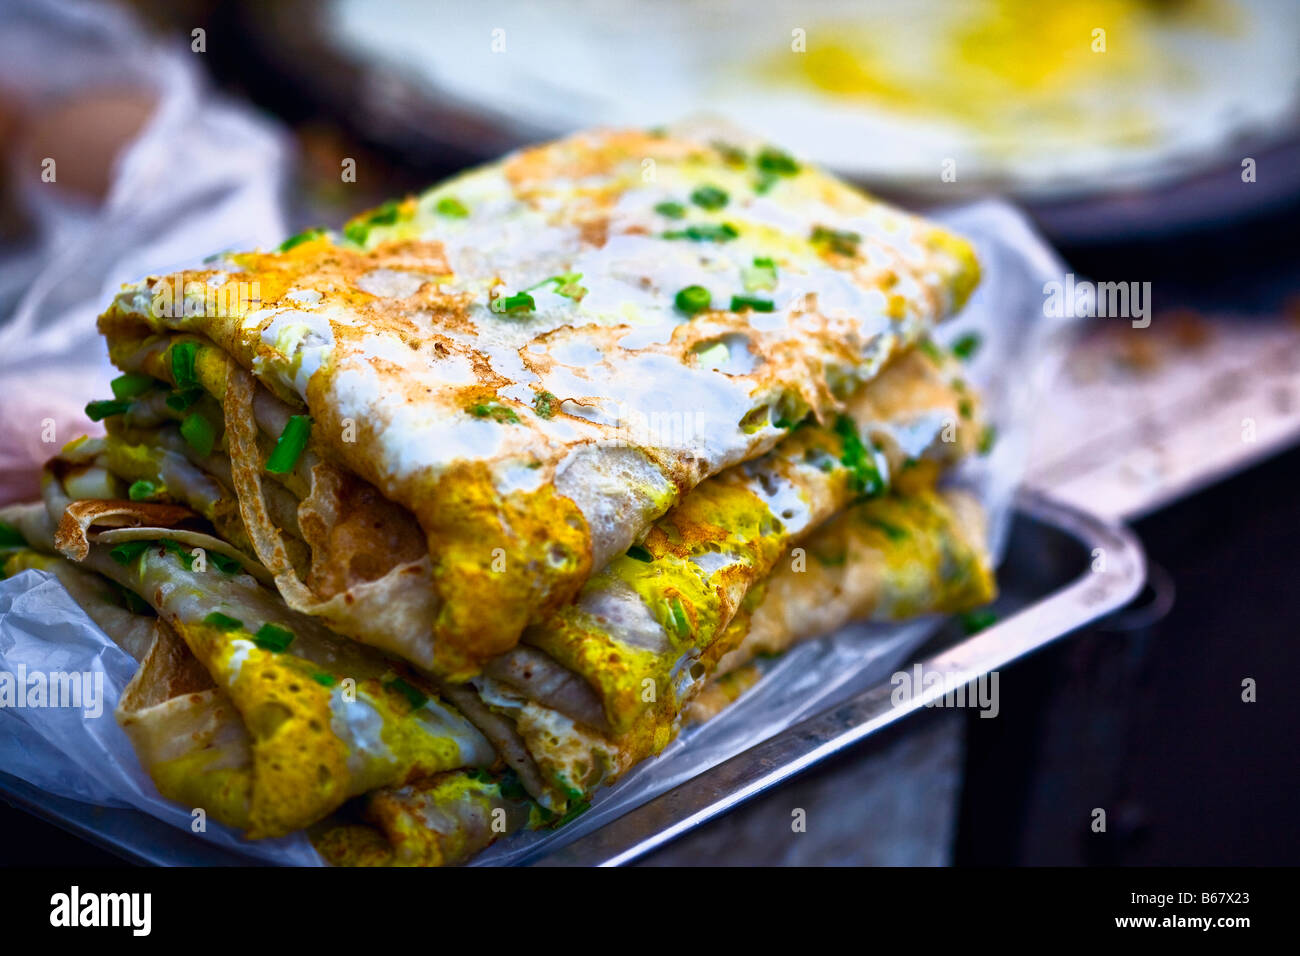 Close-up of prepared food in a tray, Beijing, China Stock Photo